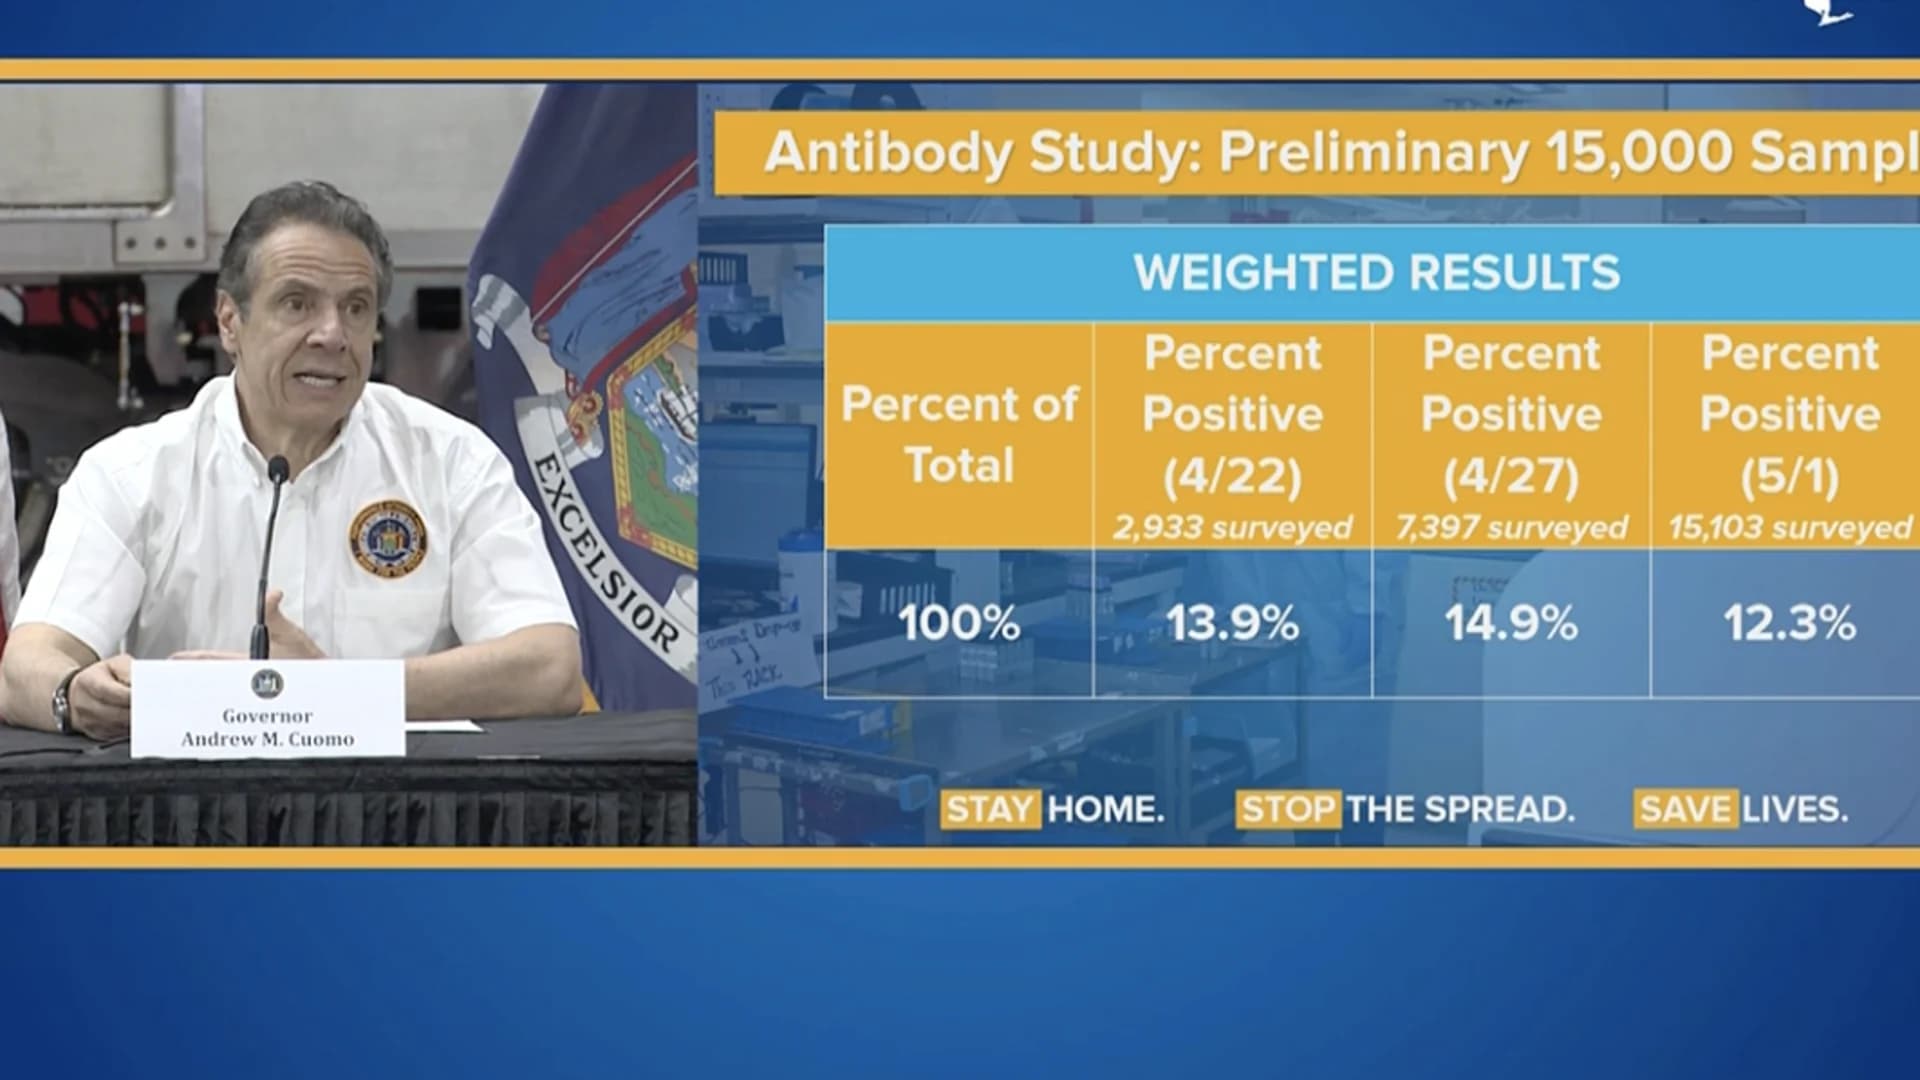 Gov. Cuomo: Latest NY antibody testing results show 12.3% rate of infection